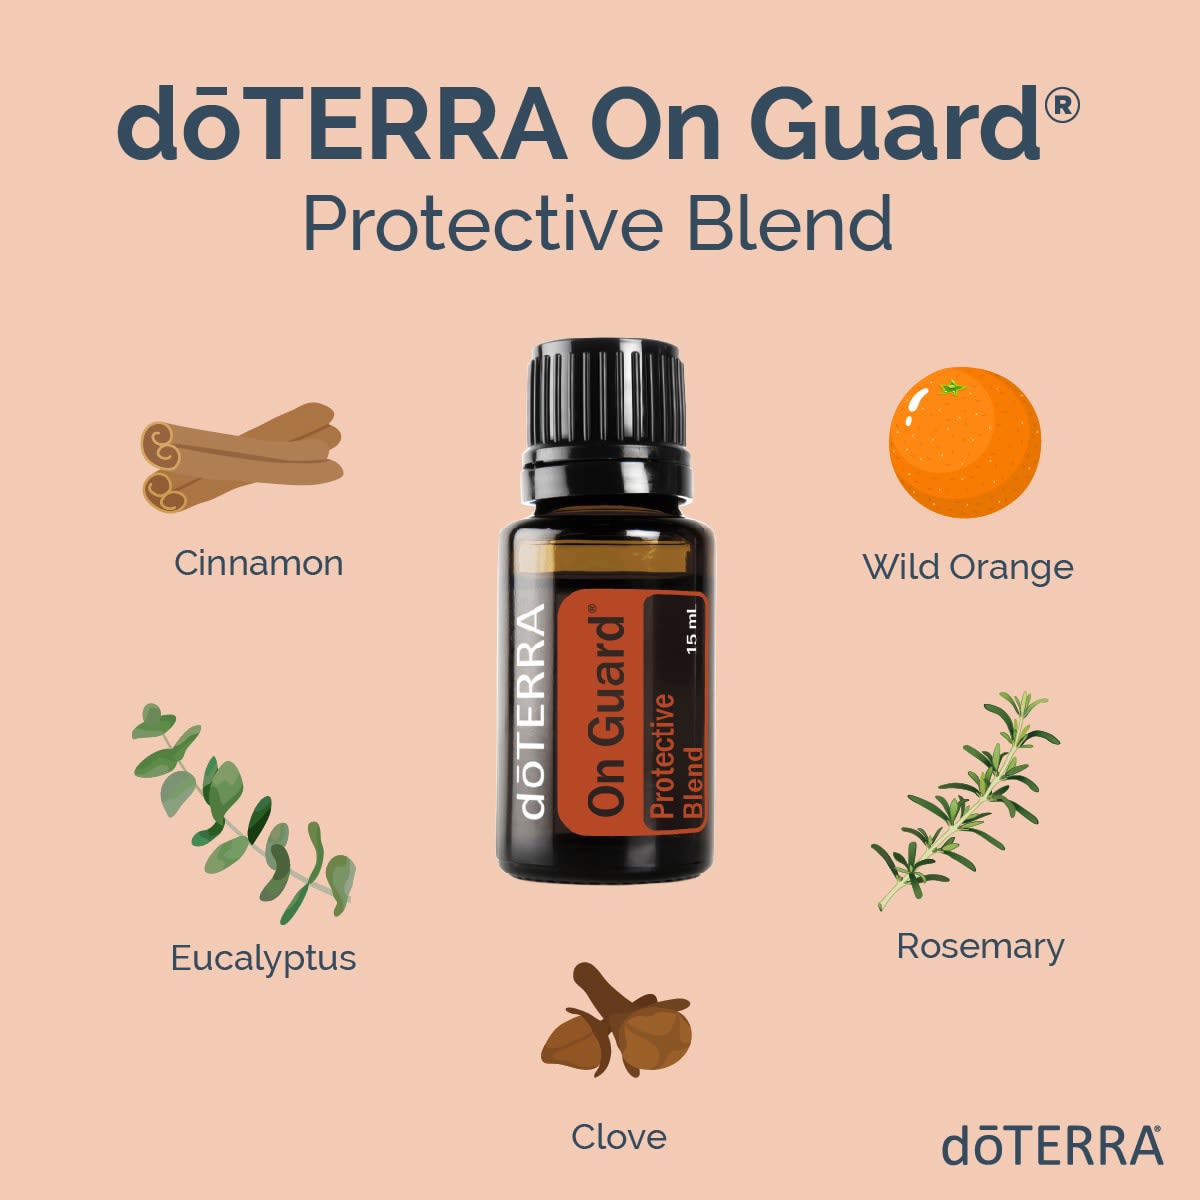 doTERRA On Guard Protective Essential Oil Blend